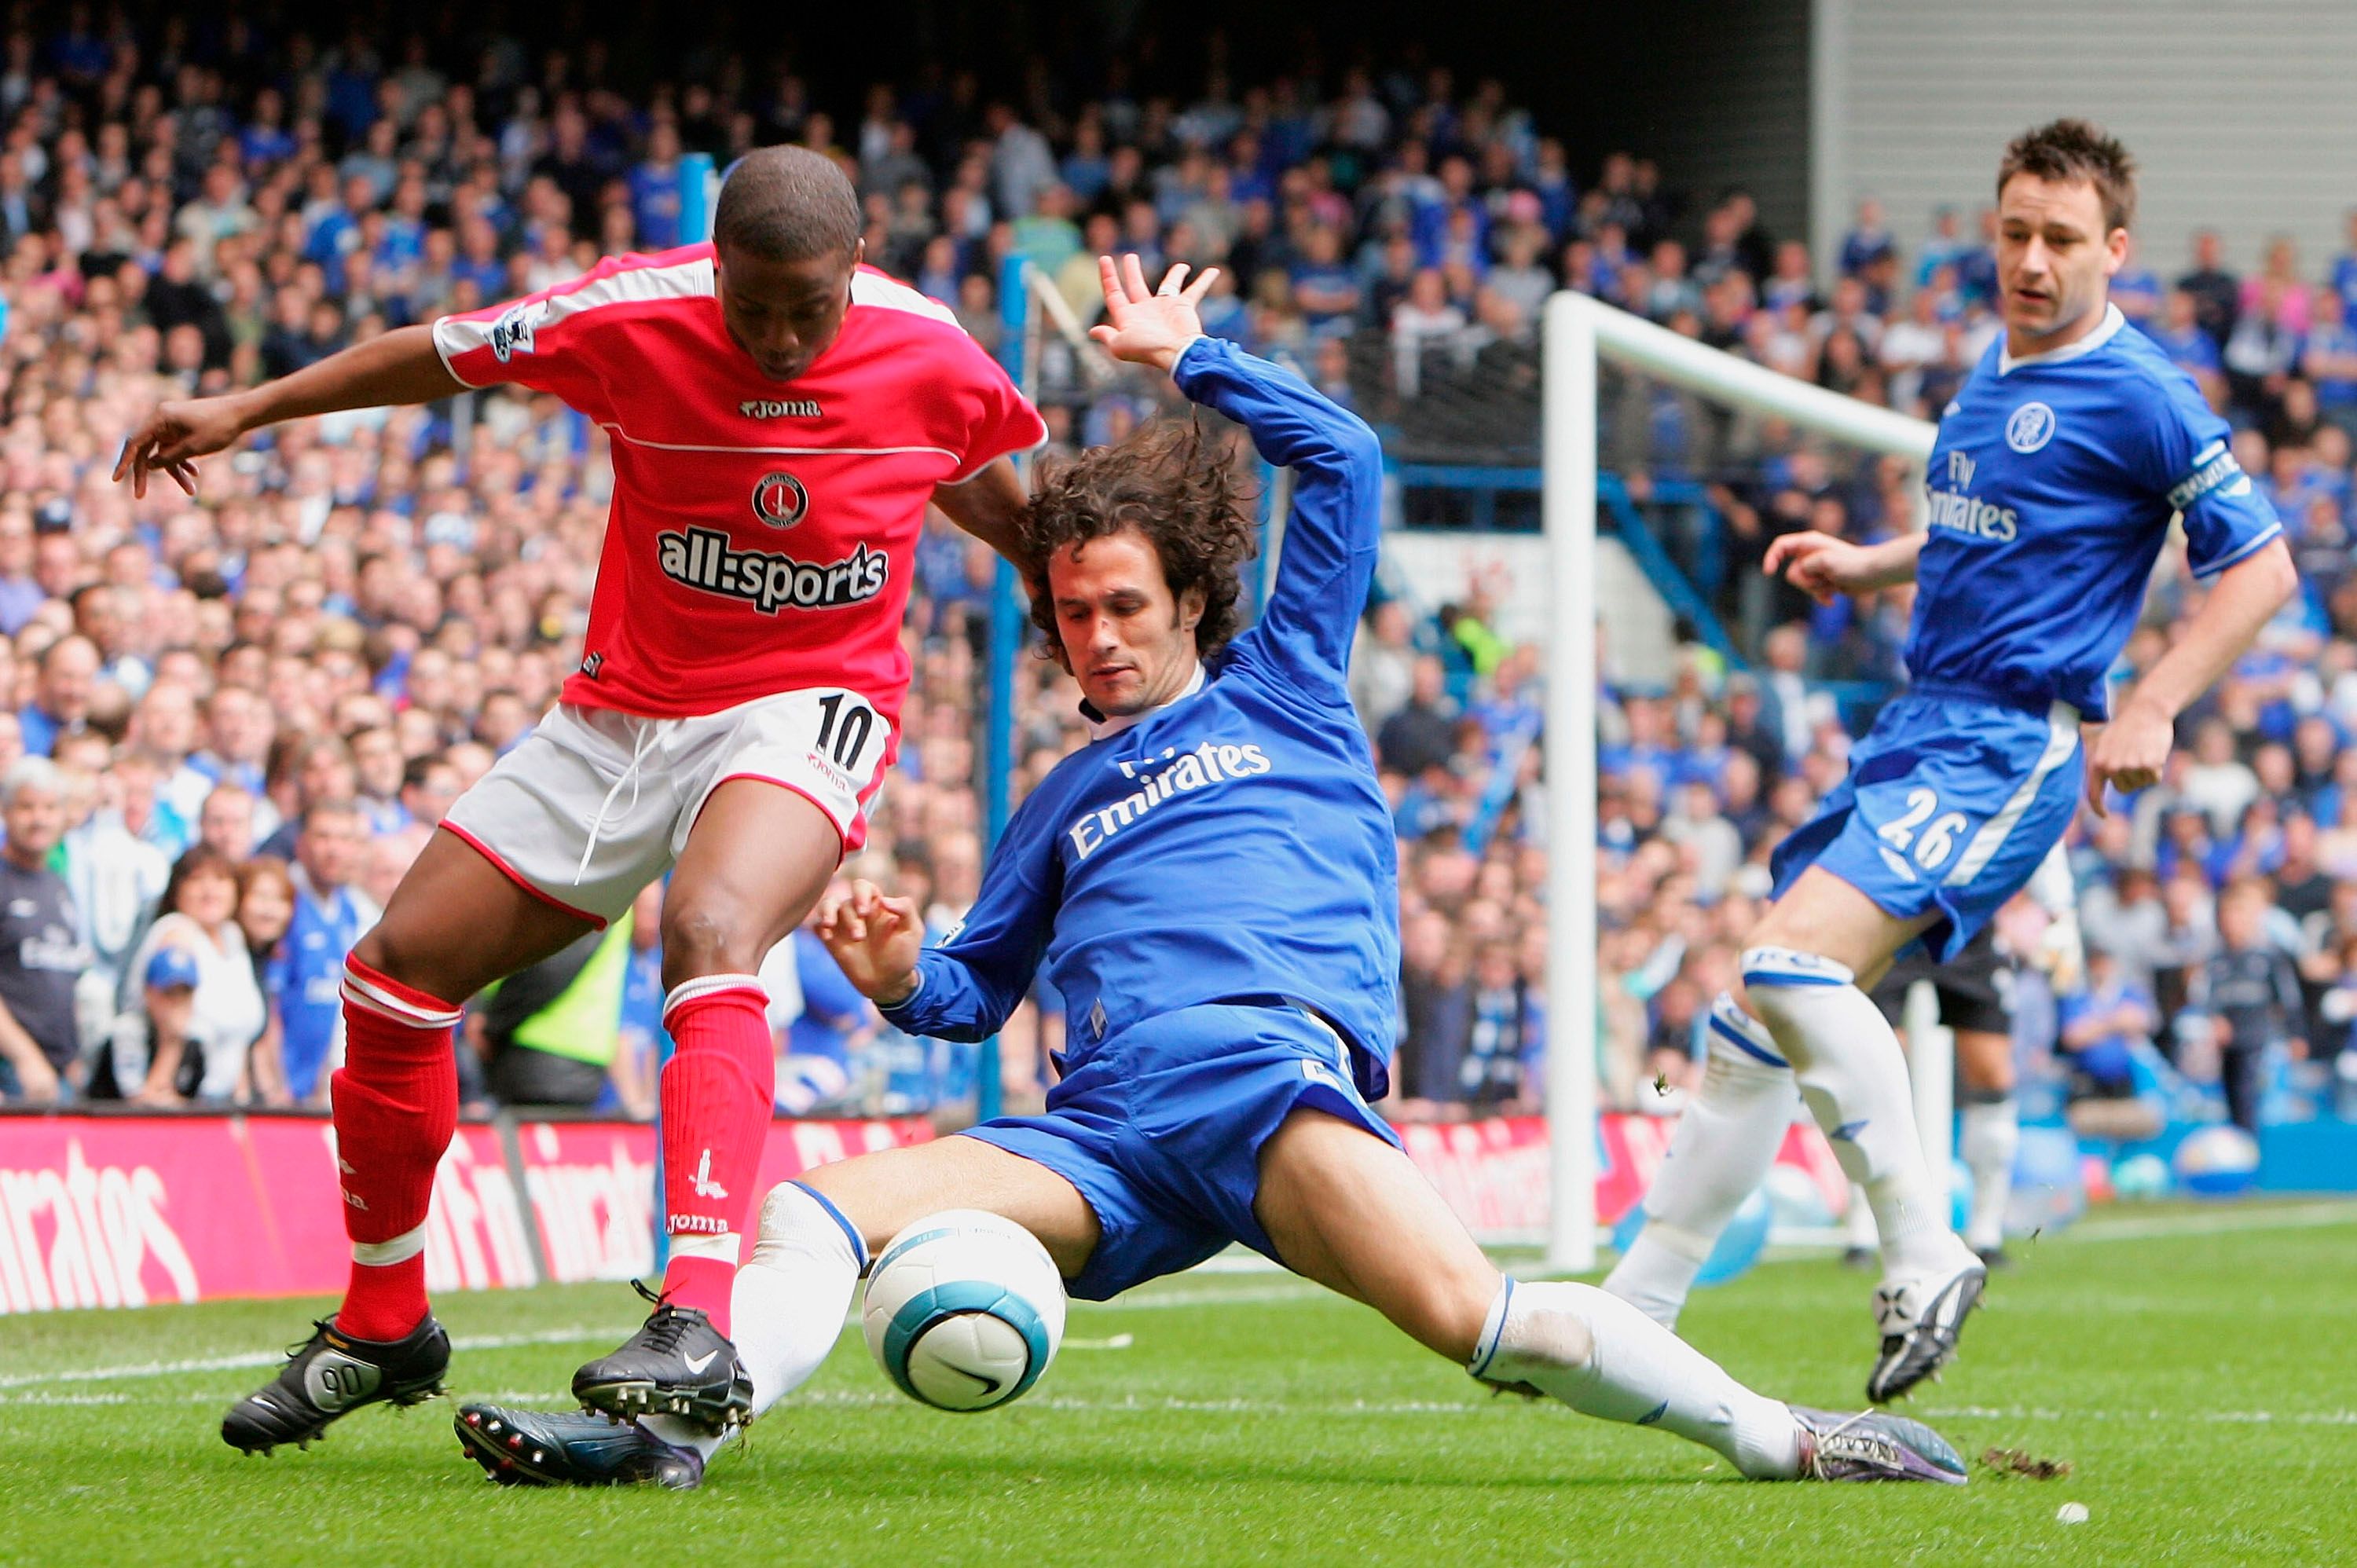 LONDON - MAY 7: Ricardo Carvalho of Chelsea tackles Kevin Lisbie of Charlton during the Barclays Premiership match between Chelsea and Charlton at Stamford Bridge on May 7, 2005 in London, England. (Photo by Mike Hewitt/Getty Images)